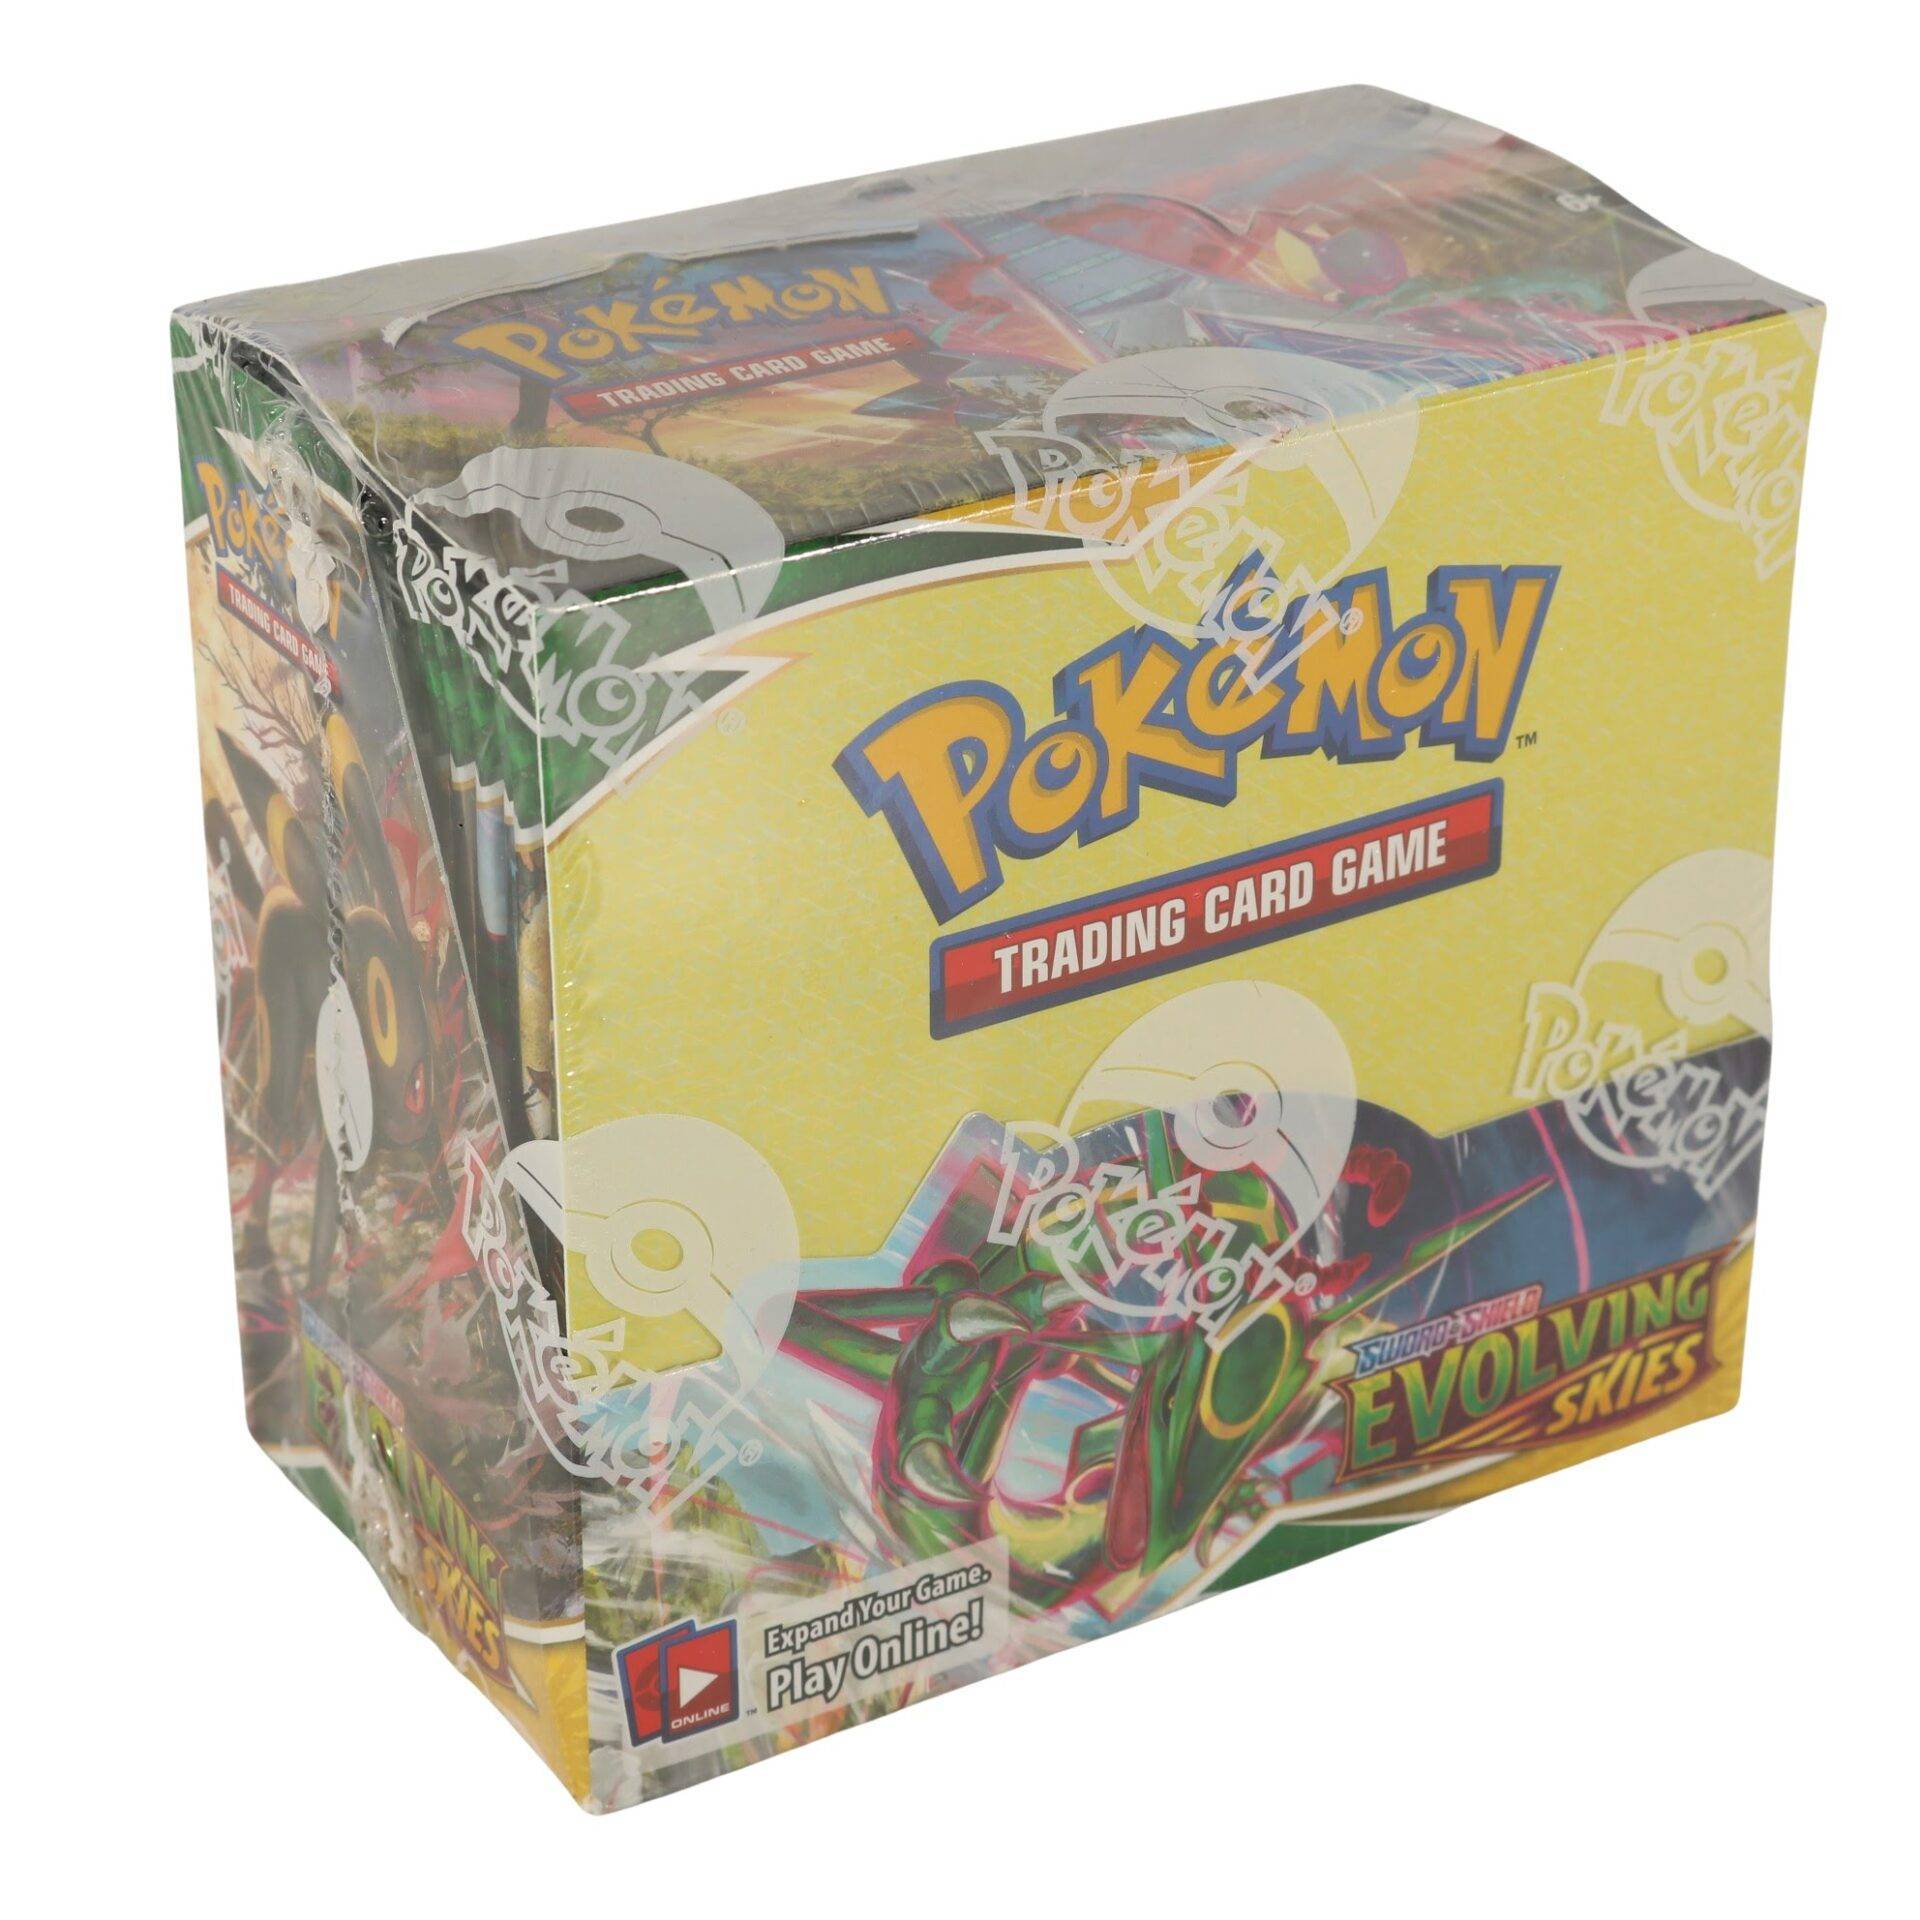  Pokémon TCG: Sword & Shield Evolving Skies Booster Box, Size:  4. Booster Display : Toys & Games